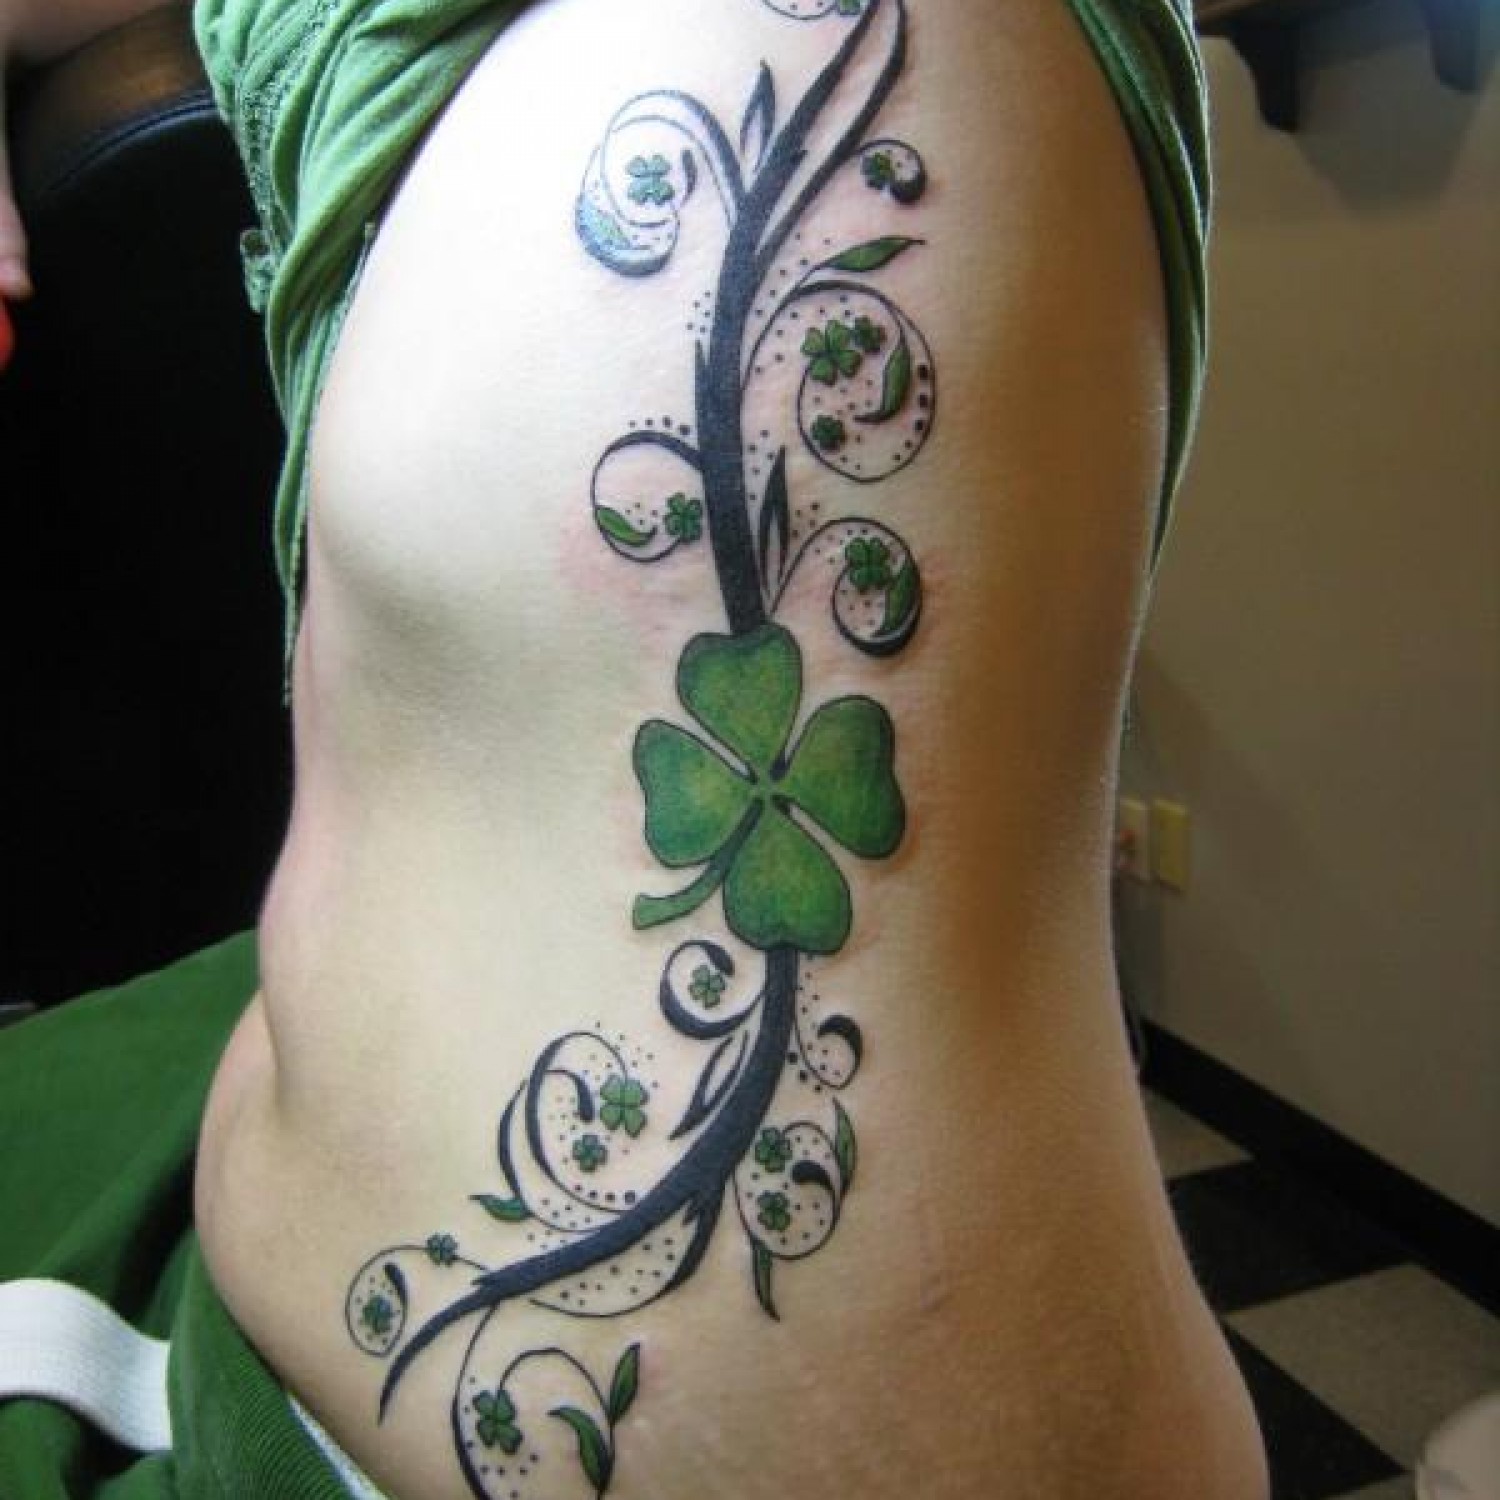 Four Leaf Clover Tattoos Designs, Ideas and Meaning